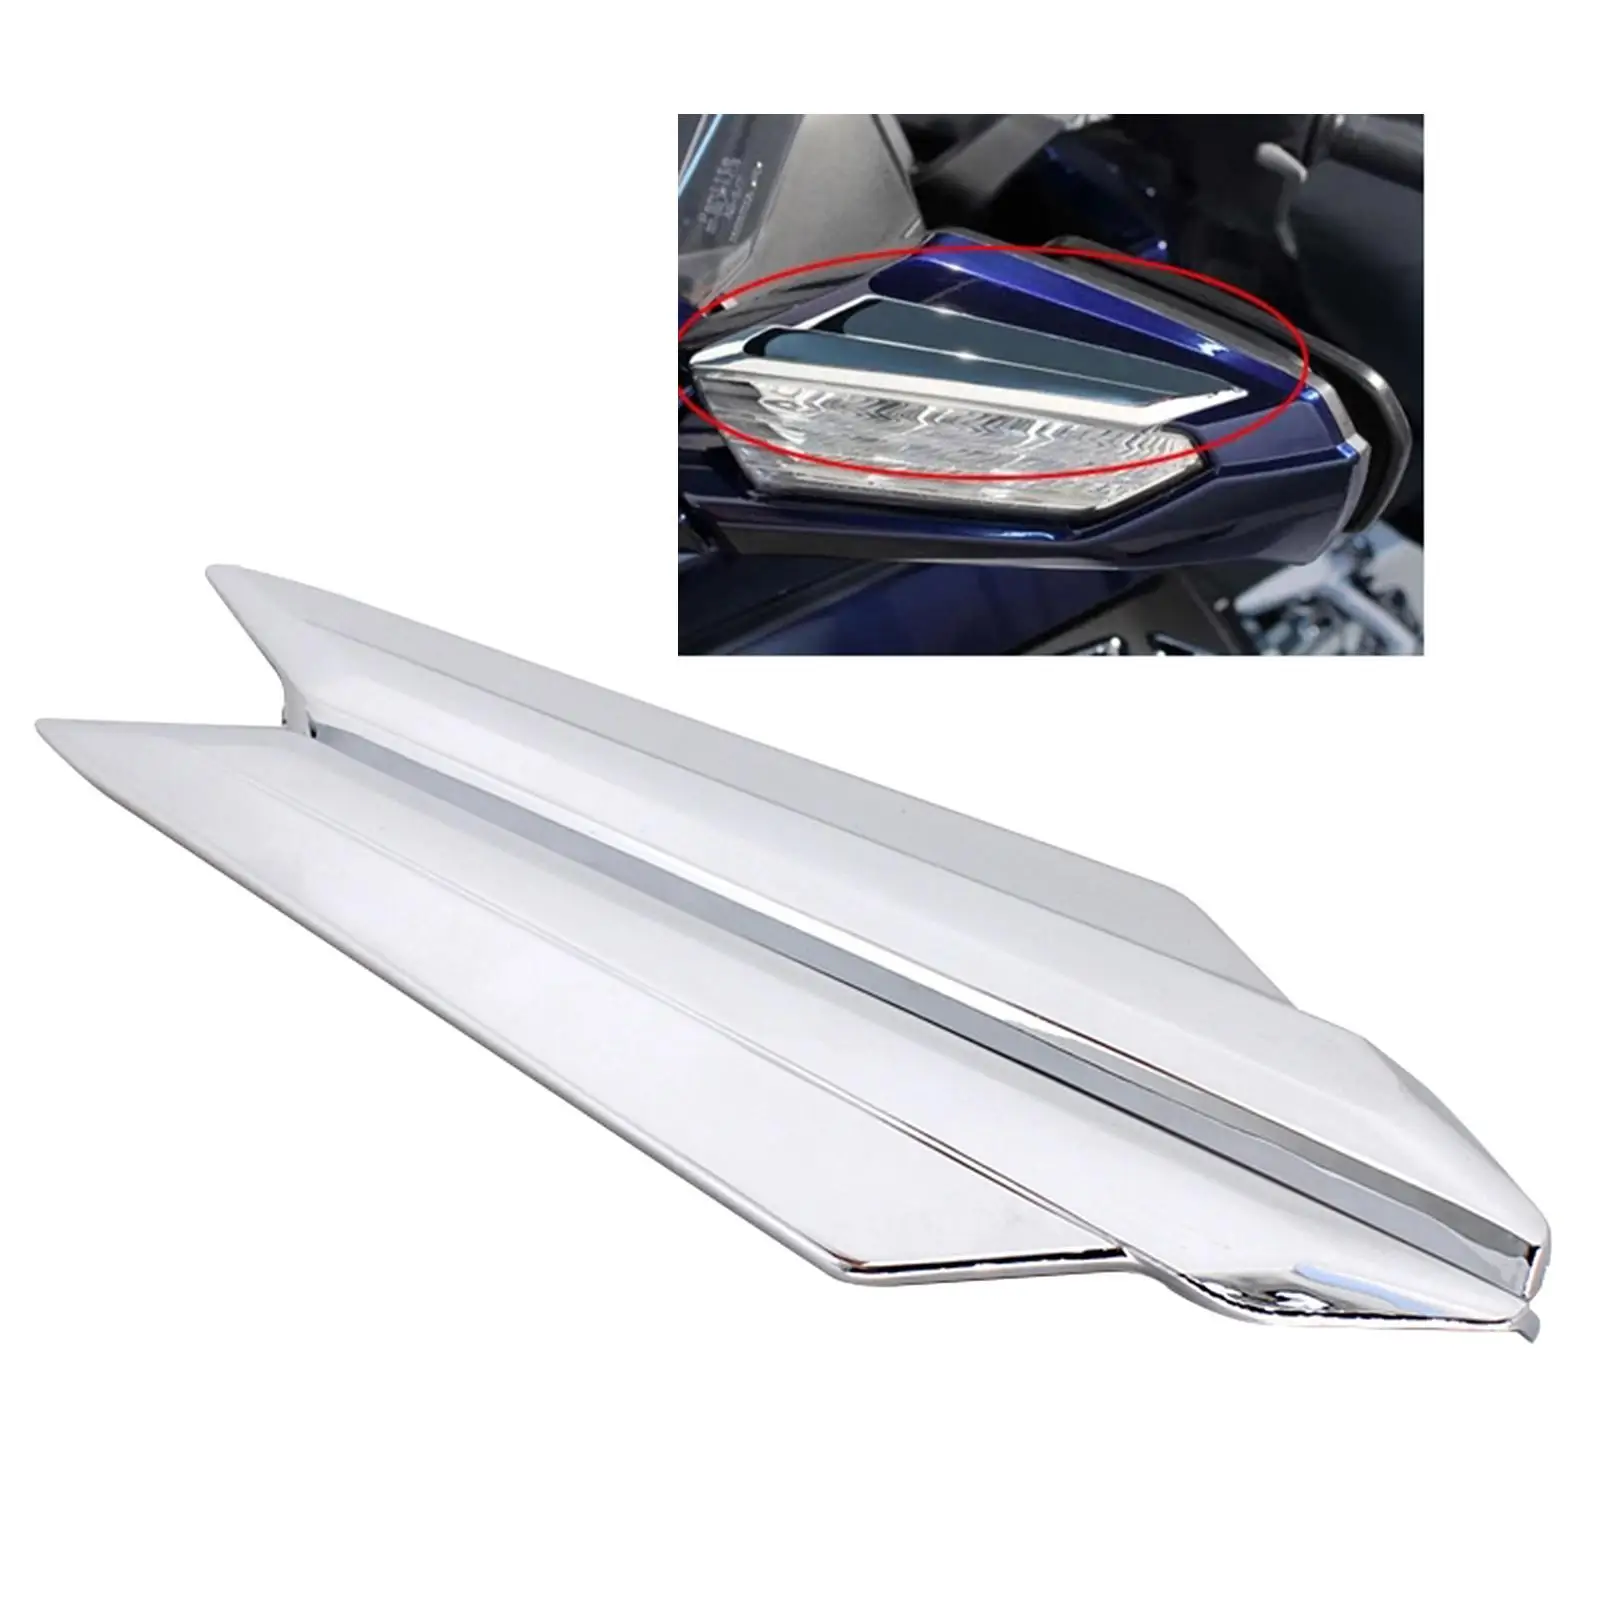 Motorcycles Decorative Cover Plastic Mirror Accents Surround & GL1833, 0